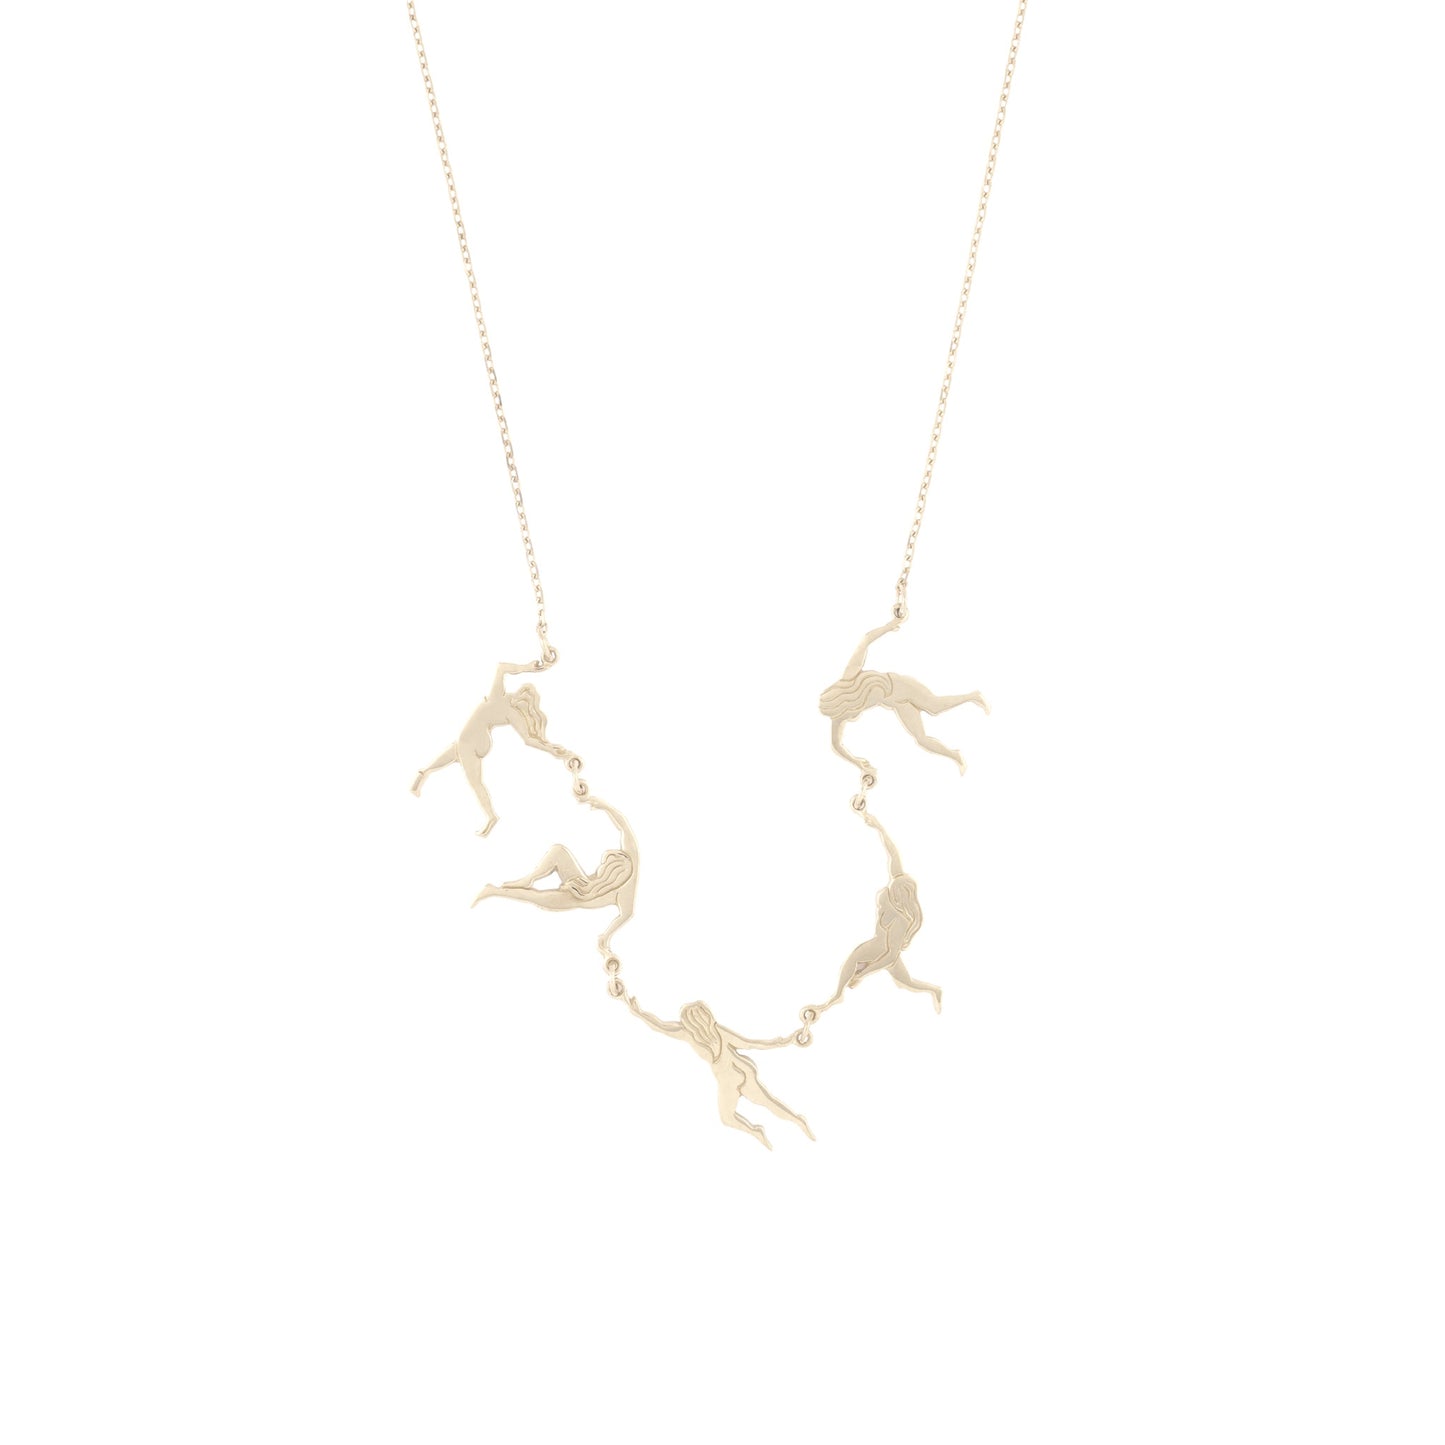 Female Dancers on Silver Chain Necklace - Hunt Of Hounds